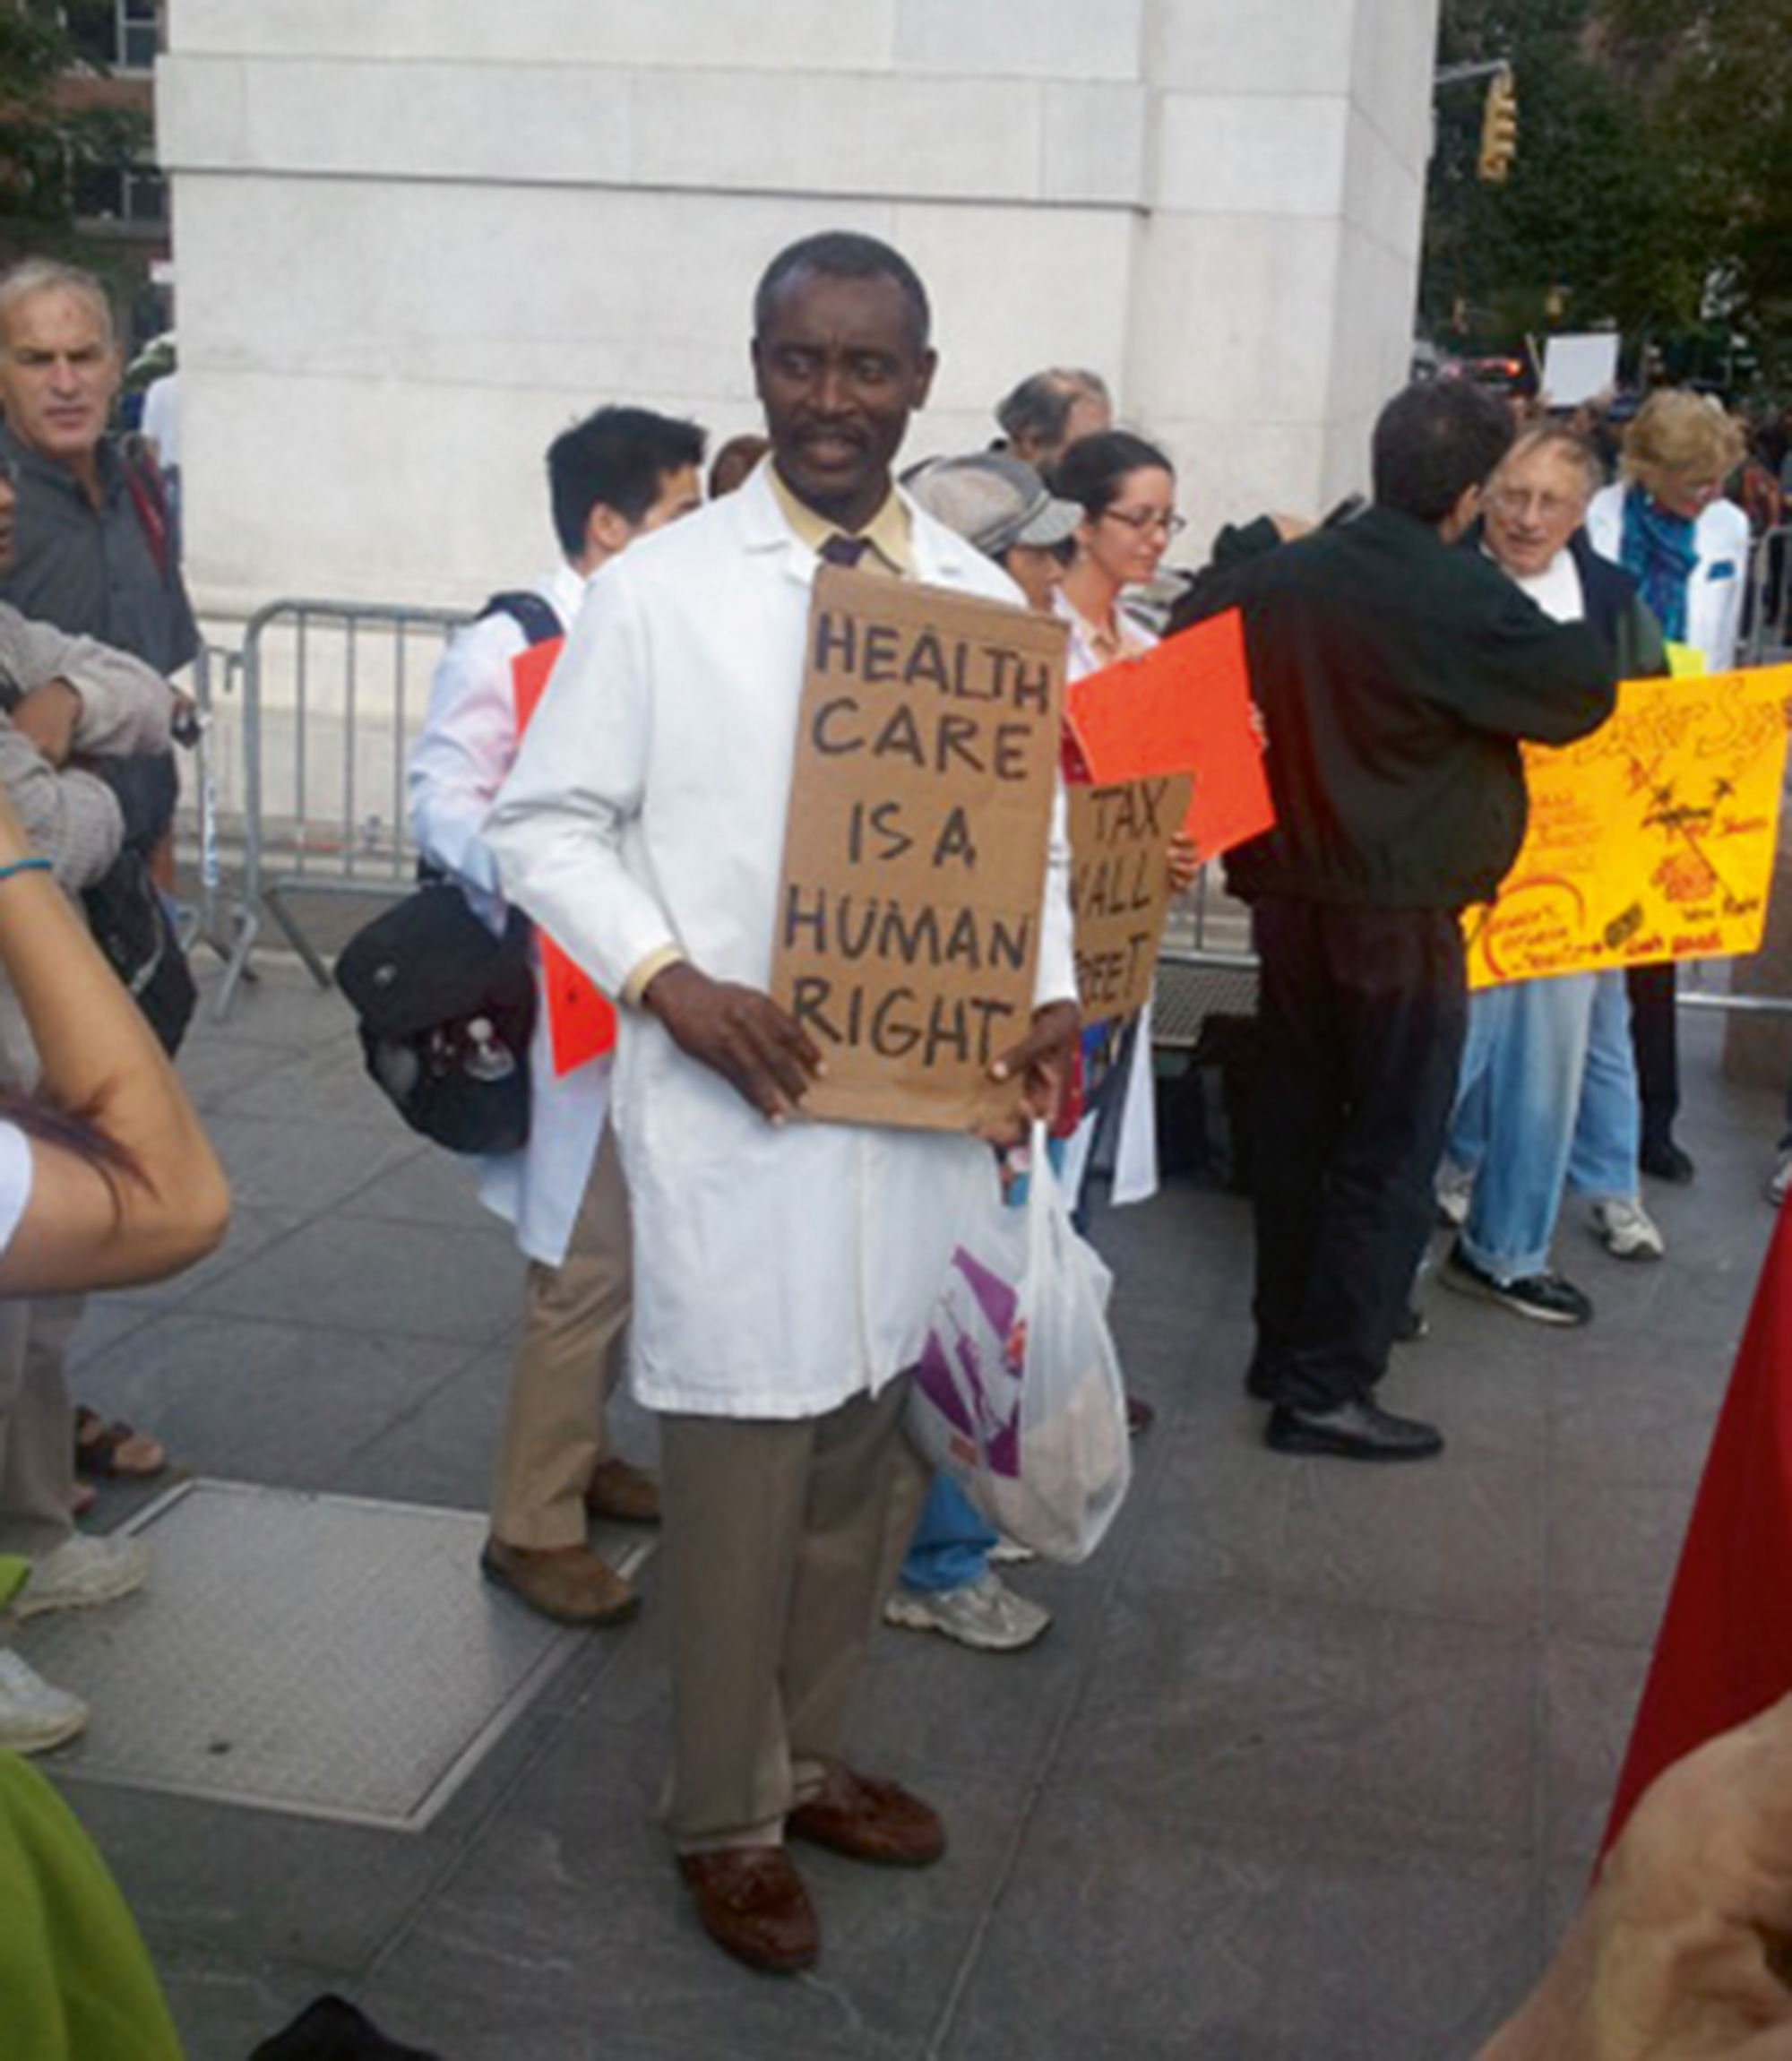 A twenty eleven photograph of a person holding a protest sign that reads “Healthcare is a human right.”